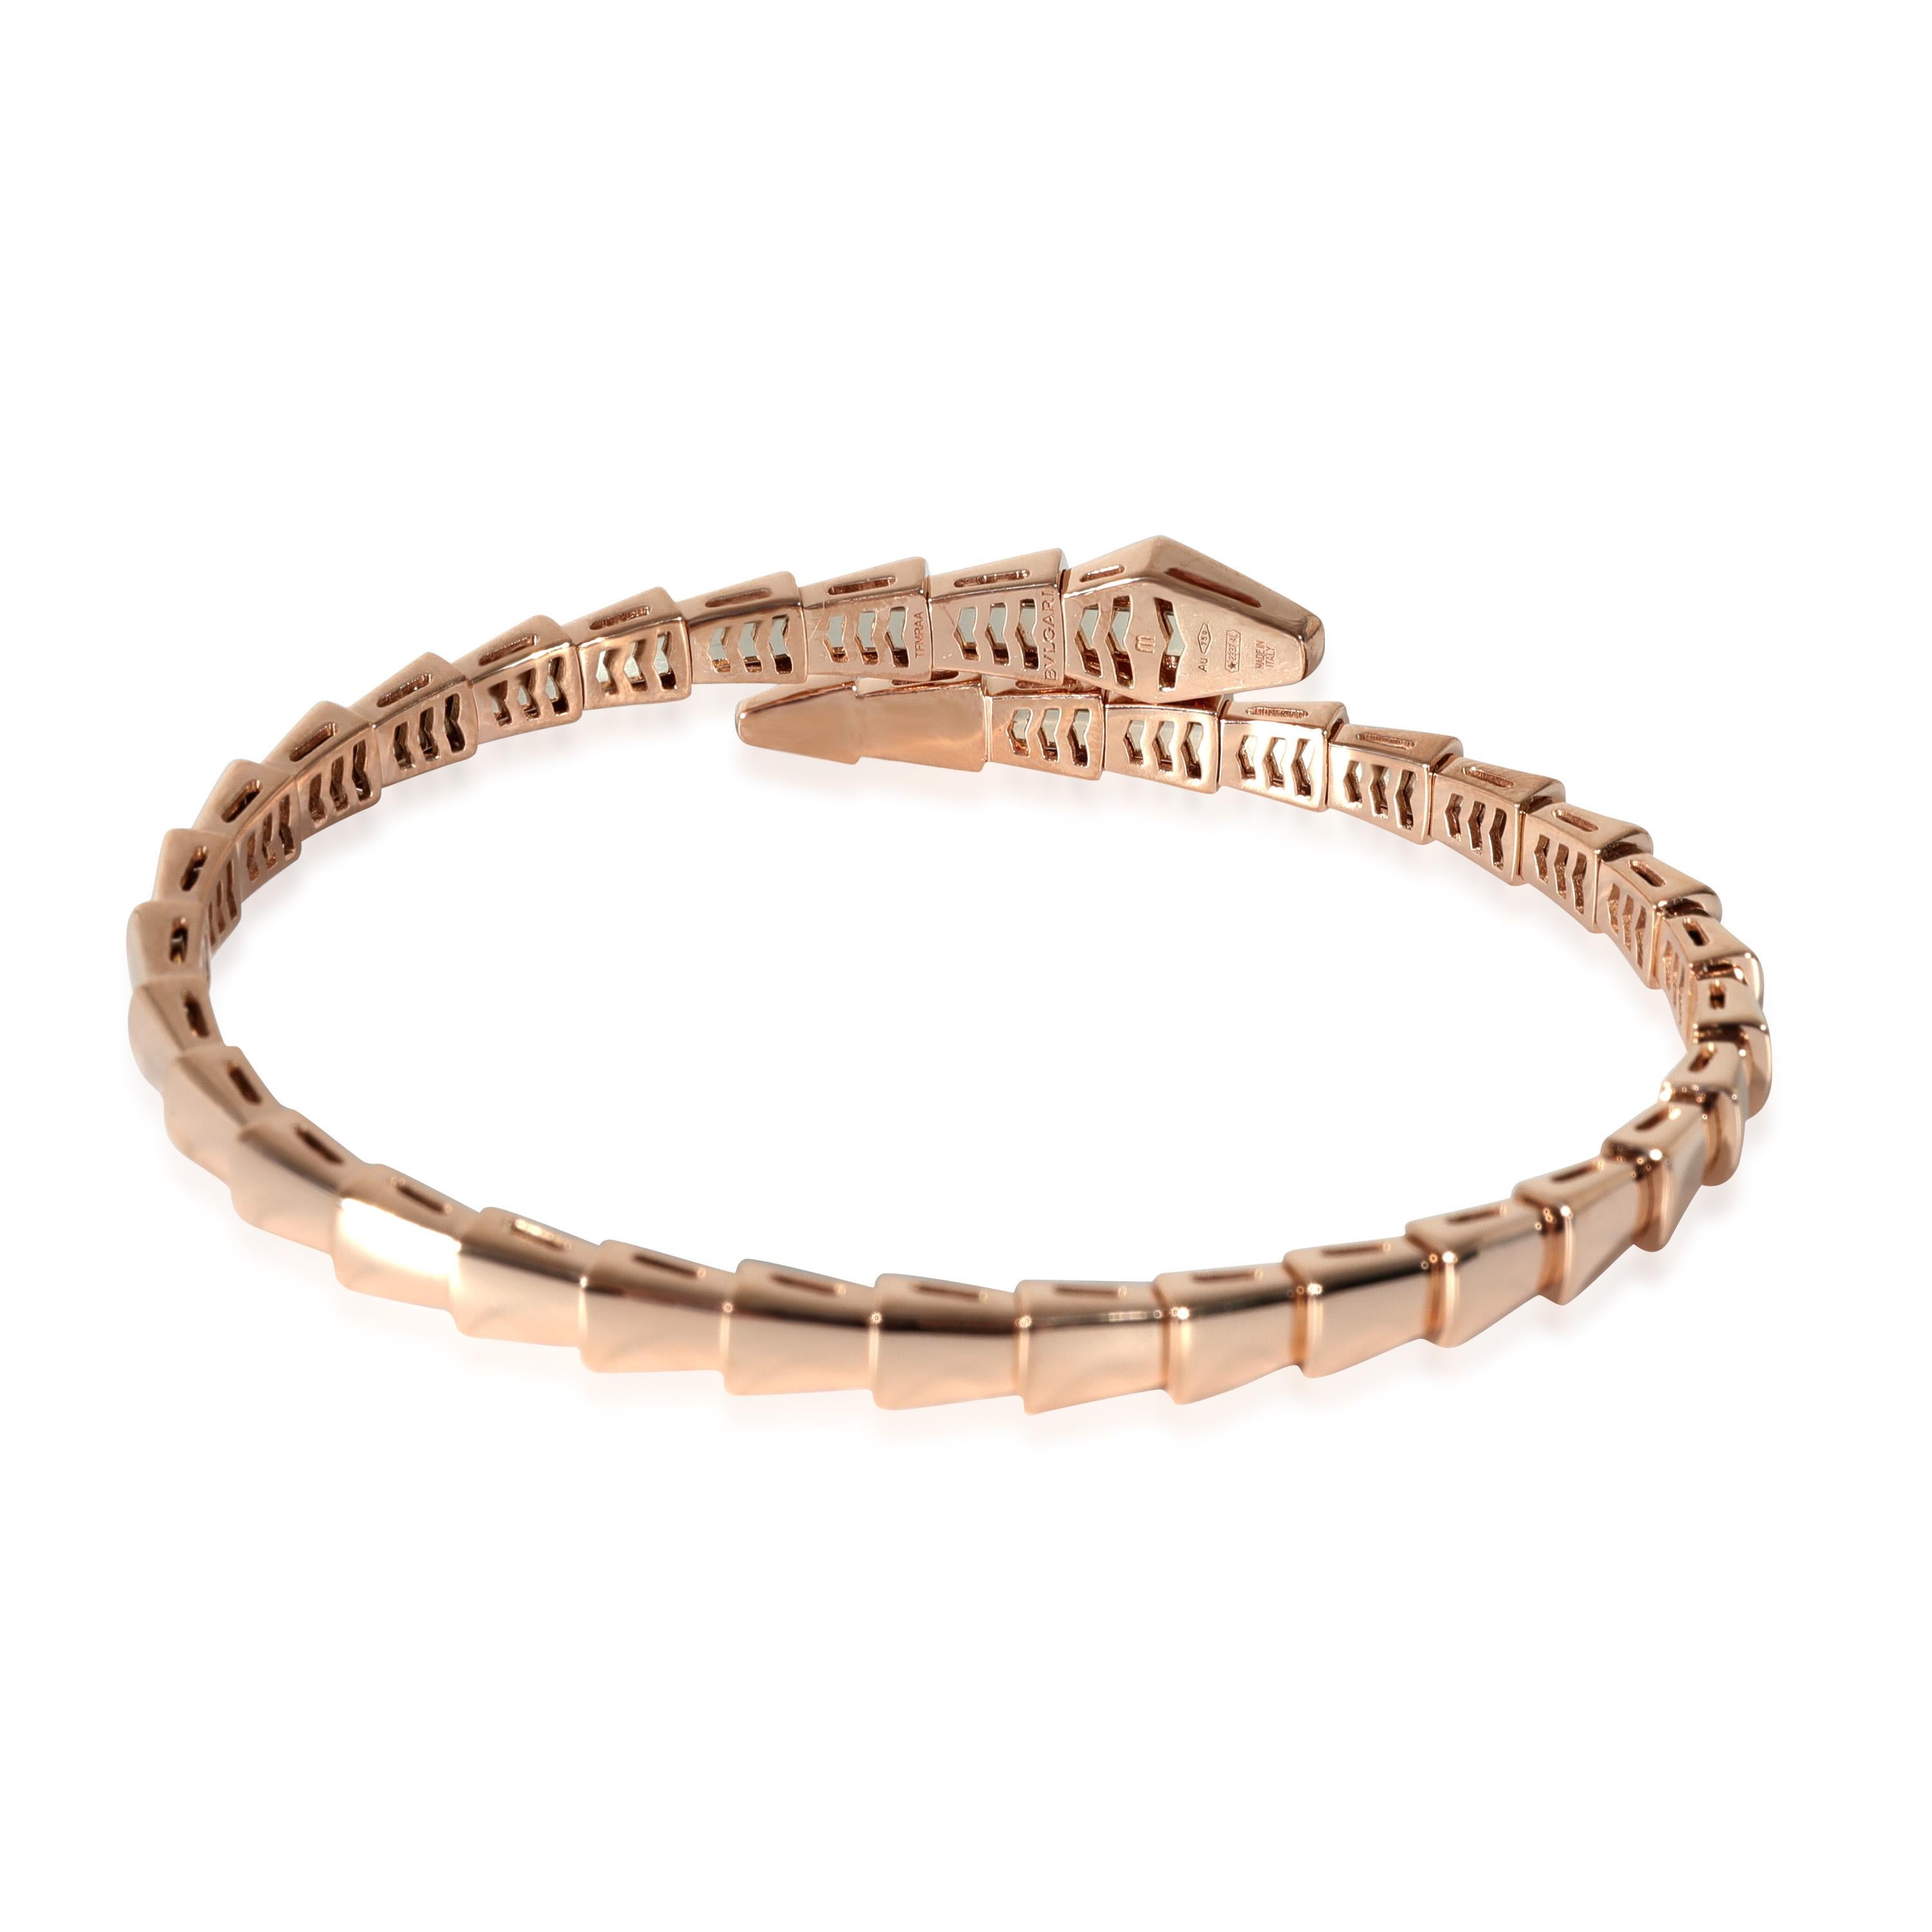 BVLGARI Serpenti Bracelet in 18k Rose Gold 0.47 CTW Size Medium

PRIMARY DETAILS
SKU: 130892
Listing Title: BVLGARI Serpenti Bracelet in 18k Rose Gold 0.47 CTW Size Medium
Condition Description: BVLGARI Serpenti collection has been a key part of the